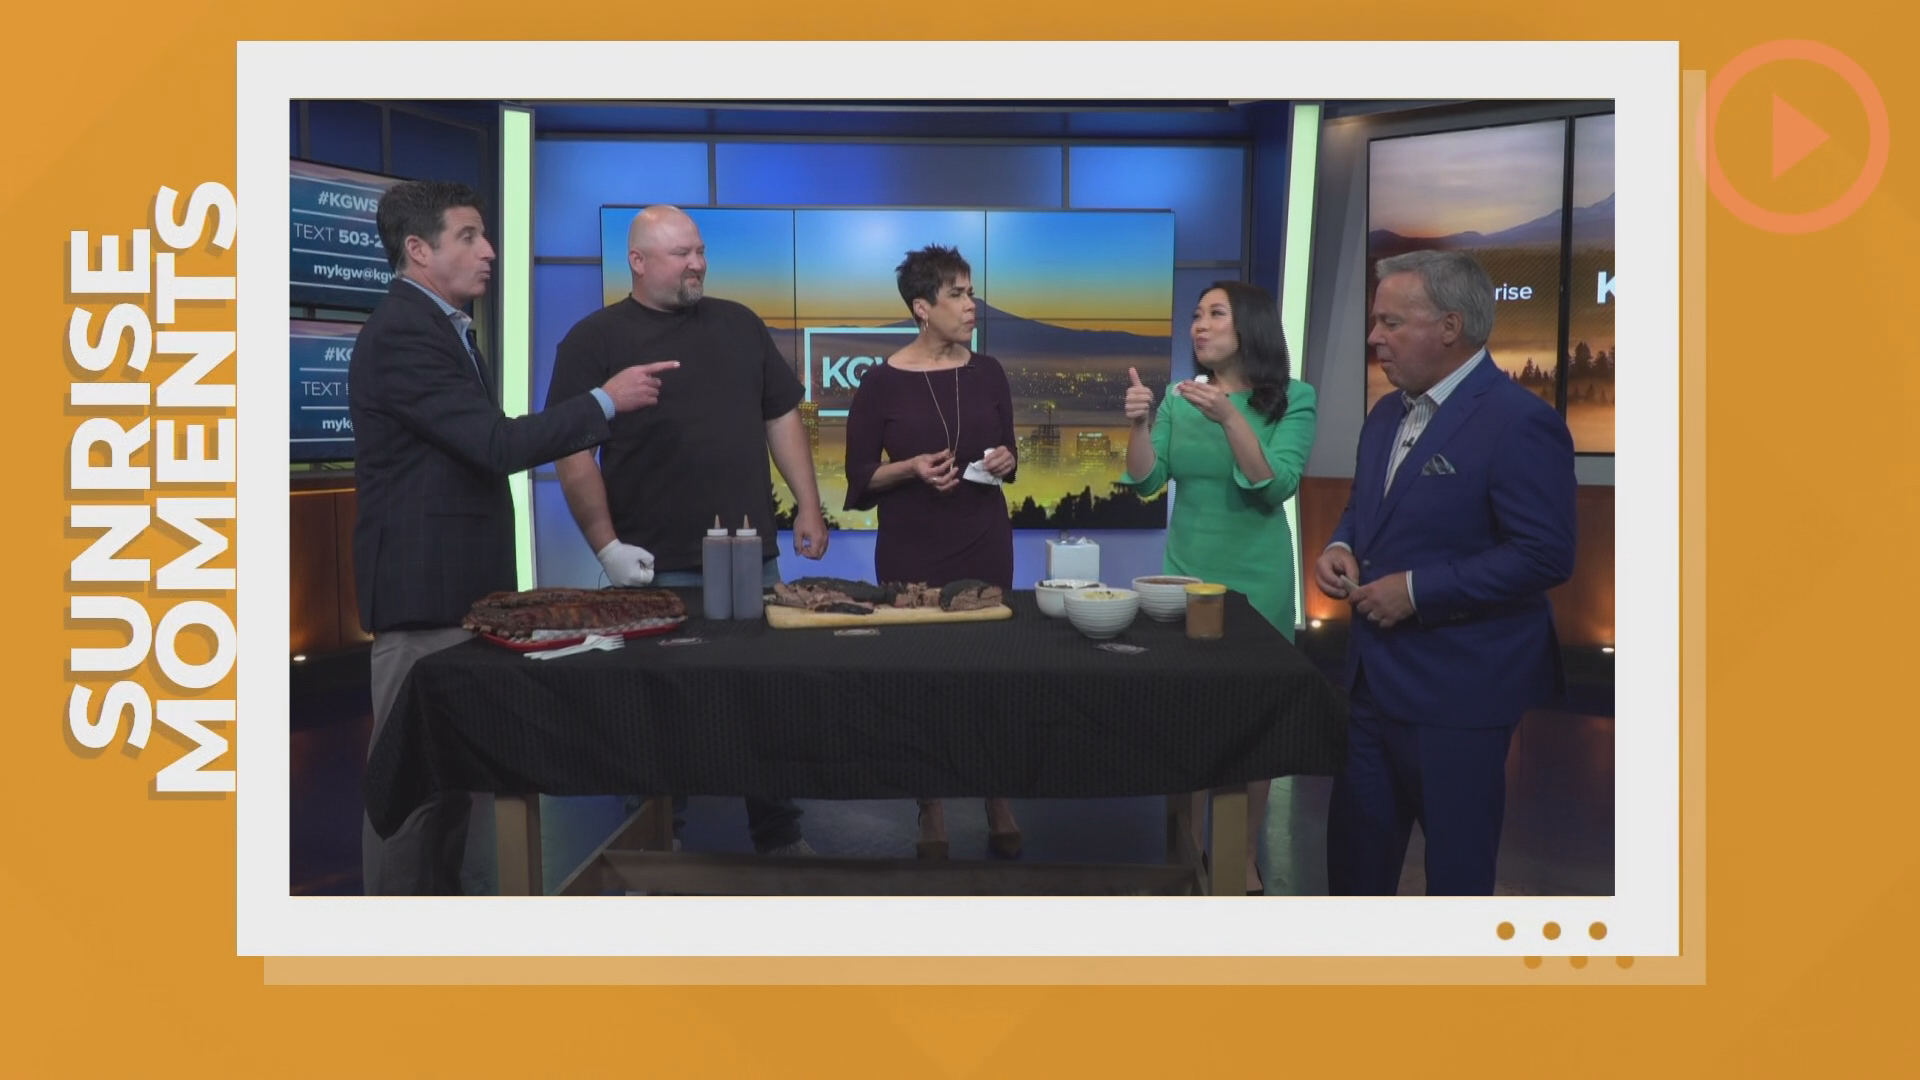 The KGW Sunrise team looks back at some of the lighter moments of the week, including tasting barbecue in the studio and trying to make coffee art.